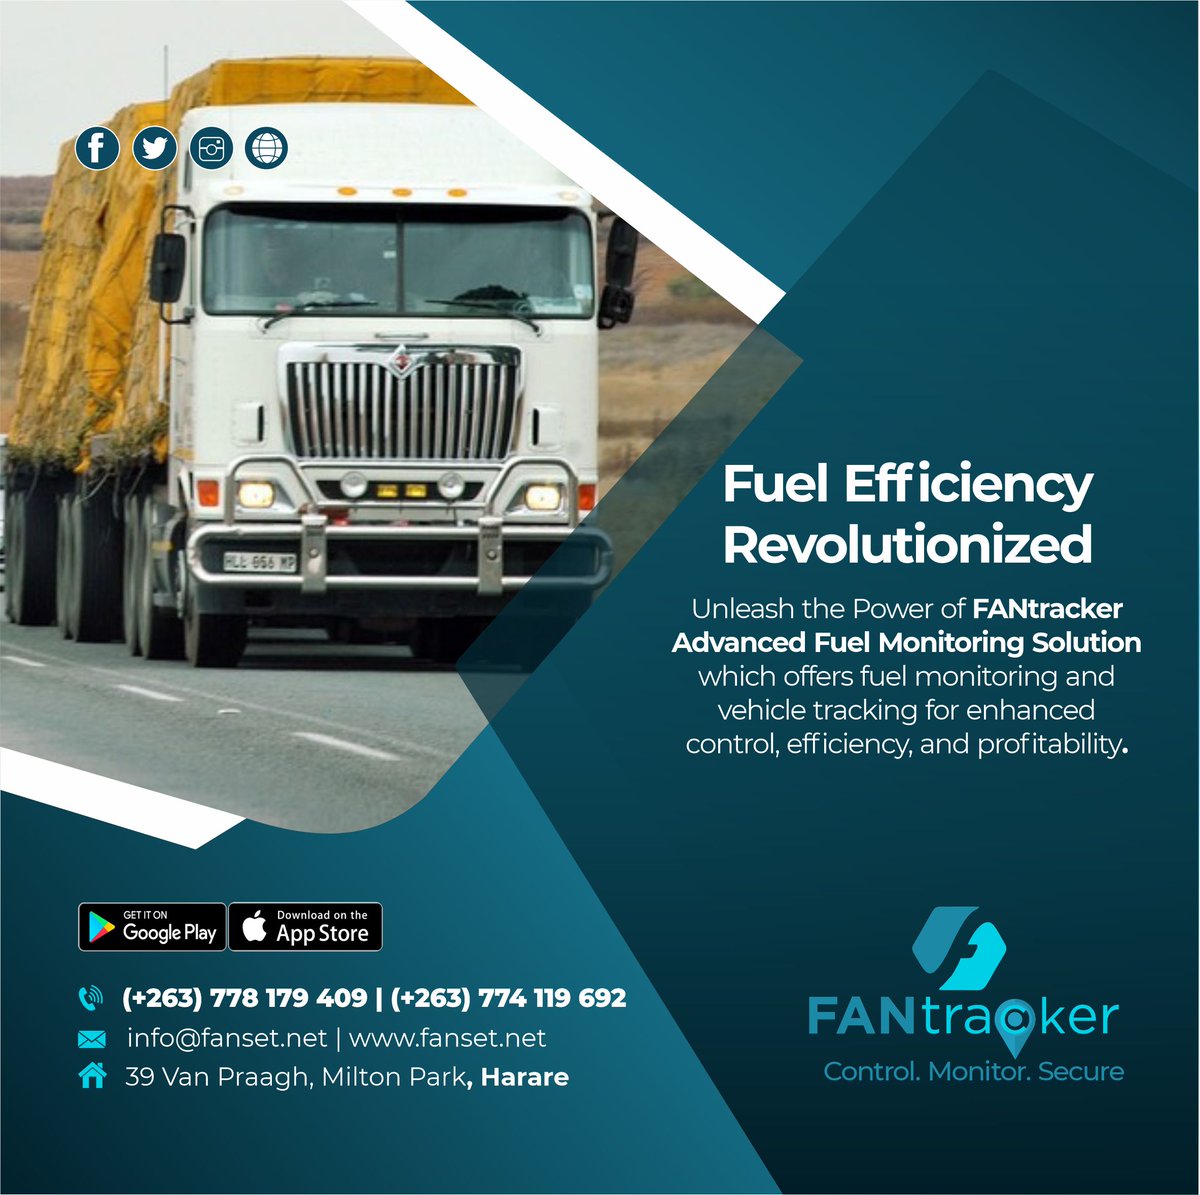 Experience Seamless Integration and Real-Time Data Insights with FANtracker Advanced Fuel Monitoring Solution. Sign up for FANtracker and get real-time alerts in case of any fuel theft and drainage! Contact FANtracker on +263778179409/ 0774119692 #Fantracker #Fuelmonitoring